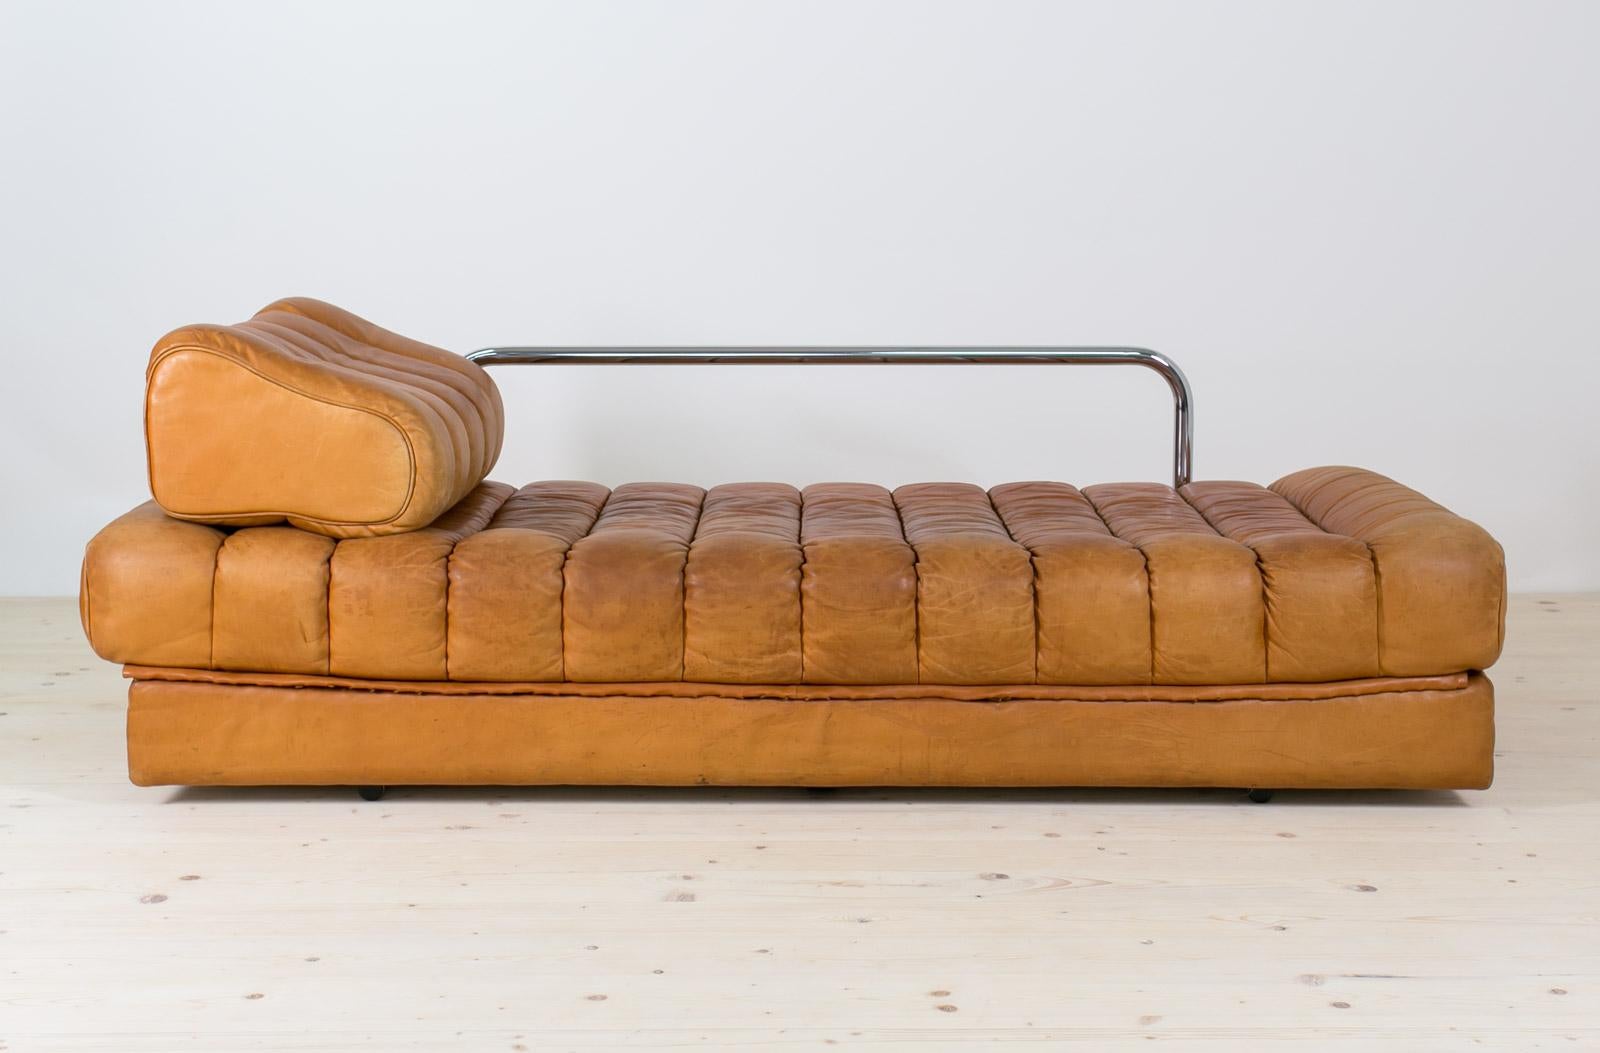 Vintage Swiss De Sede Sofa Bed from the 1960s, model DS 85 6